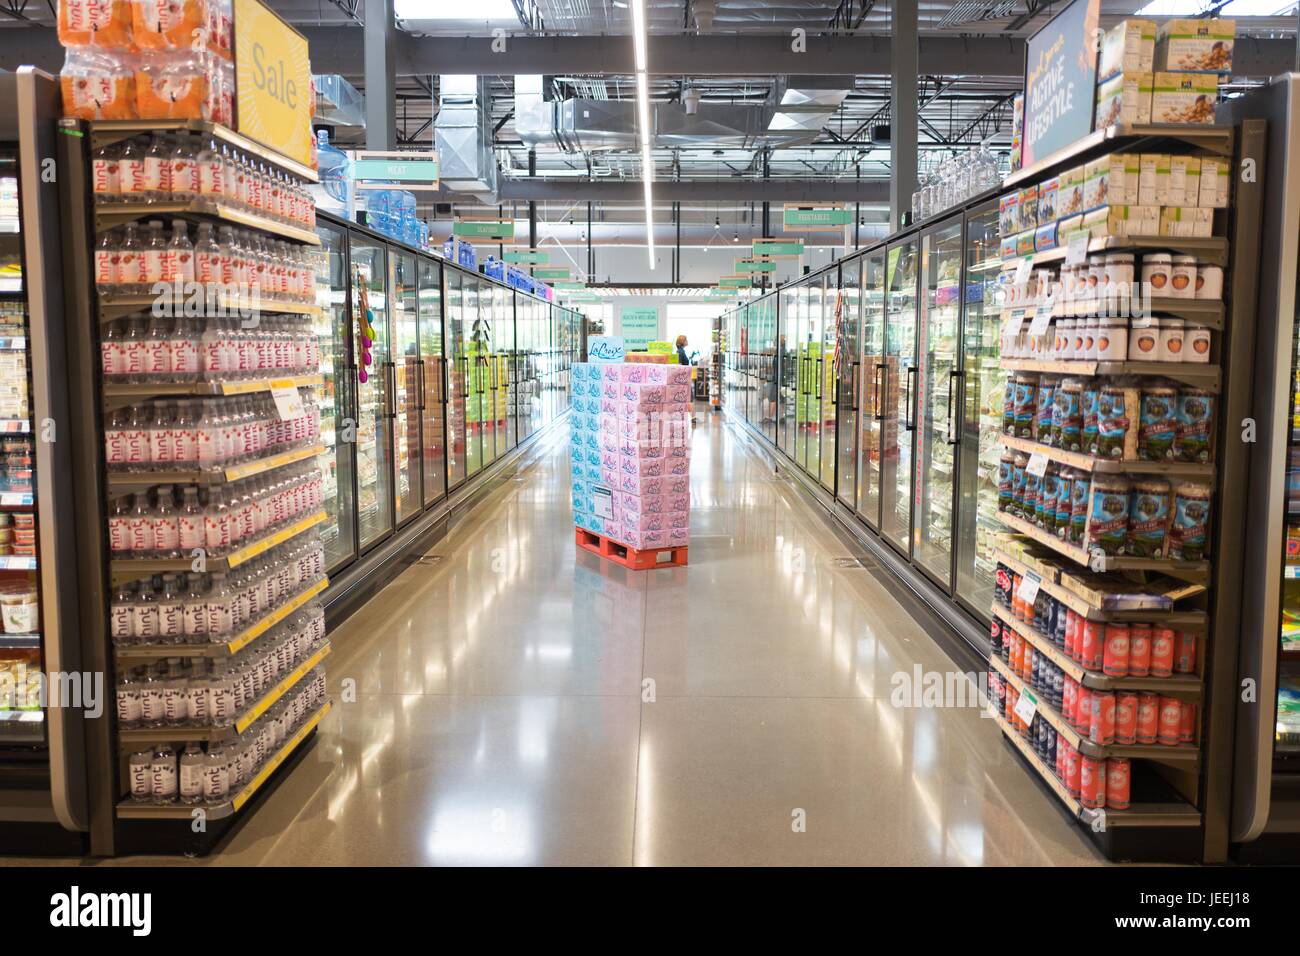 View down a refrigerated food aisle at the Whole Foods Market grocery store in Dublin, California, June 16, 2017. Stock Photo